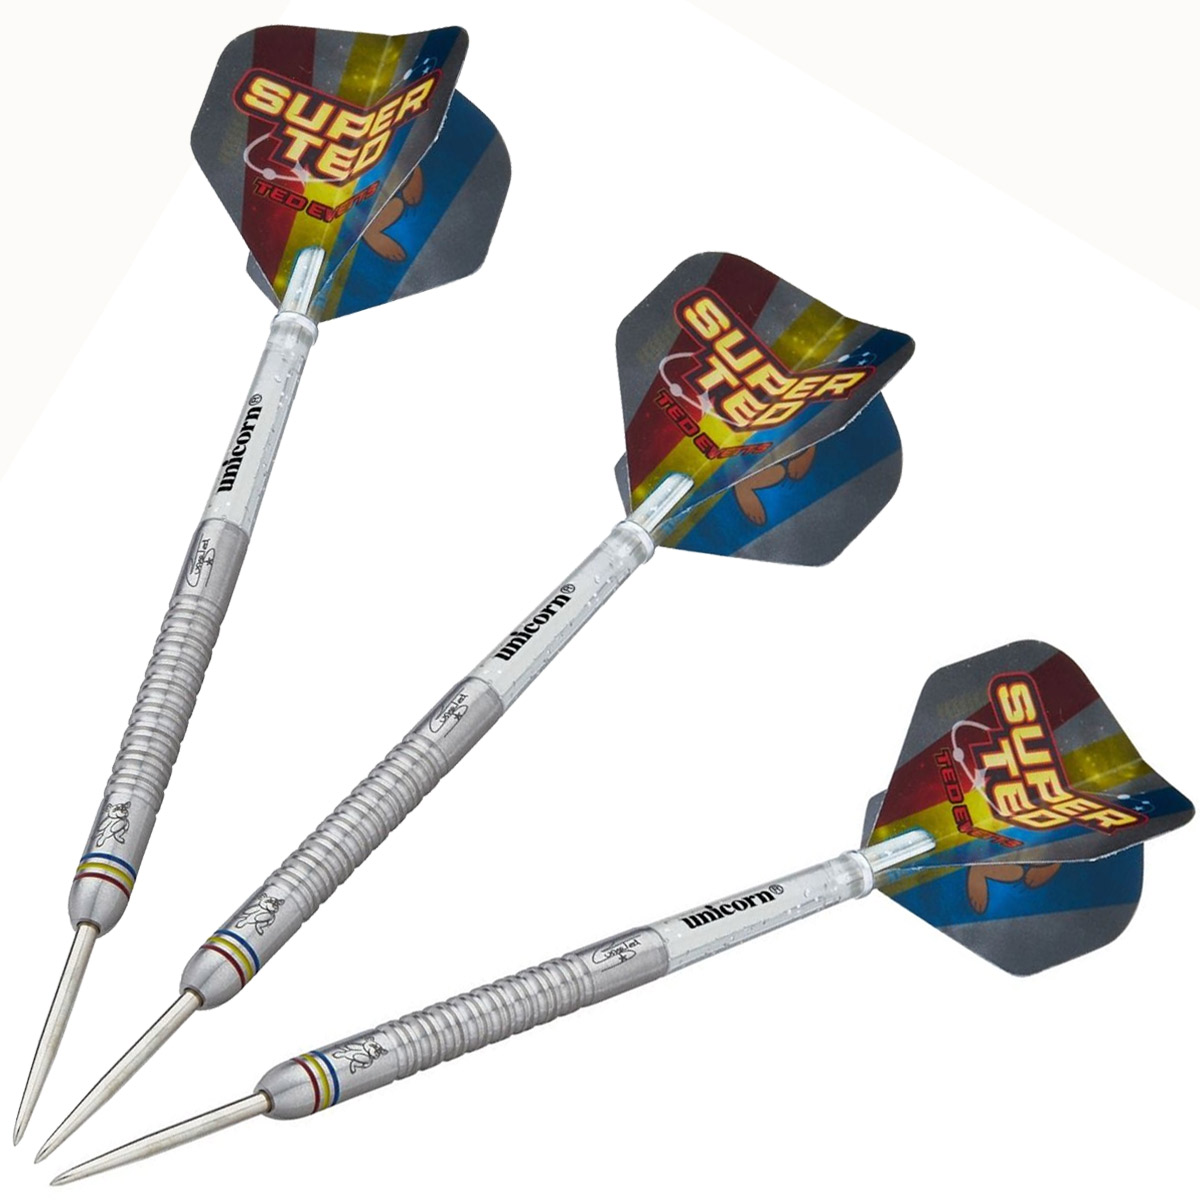 Ted Evetts Phase 2 Super Ted darts set